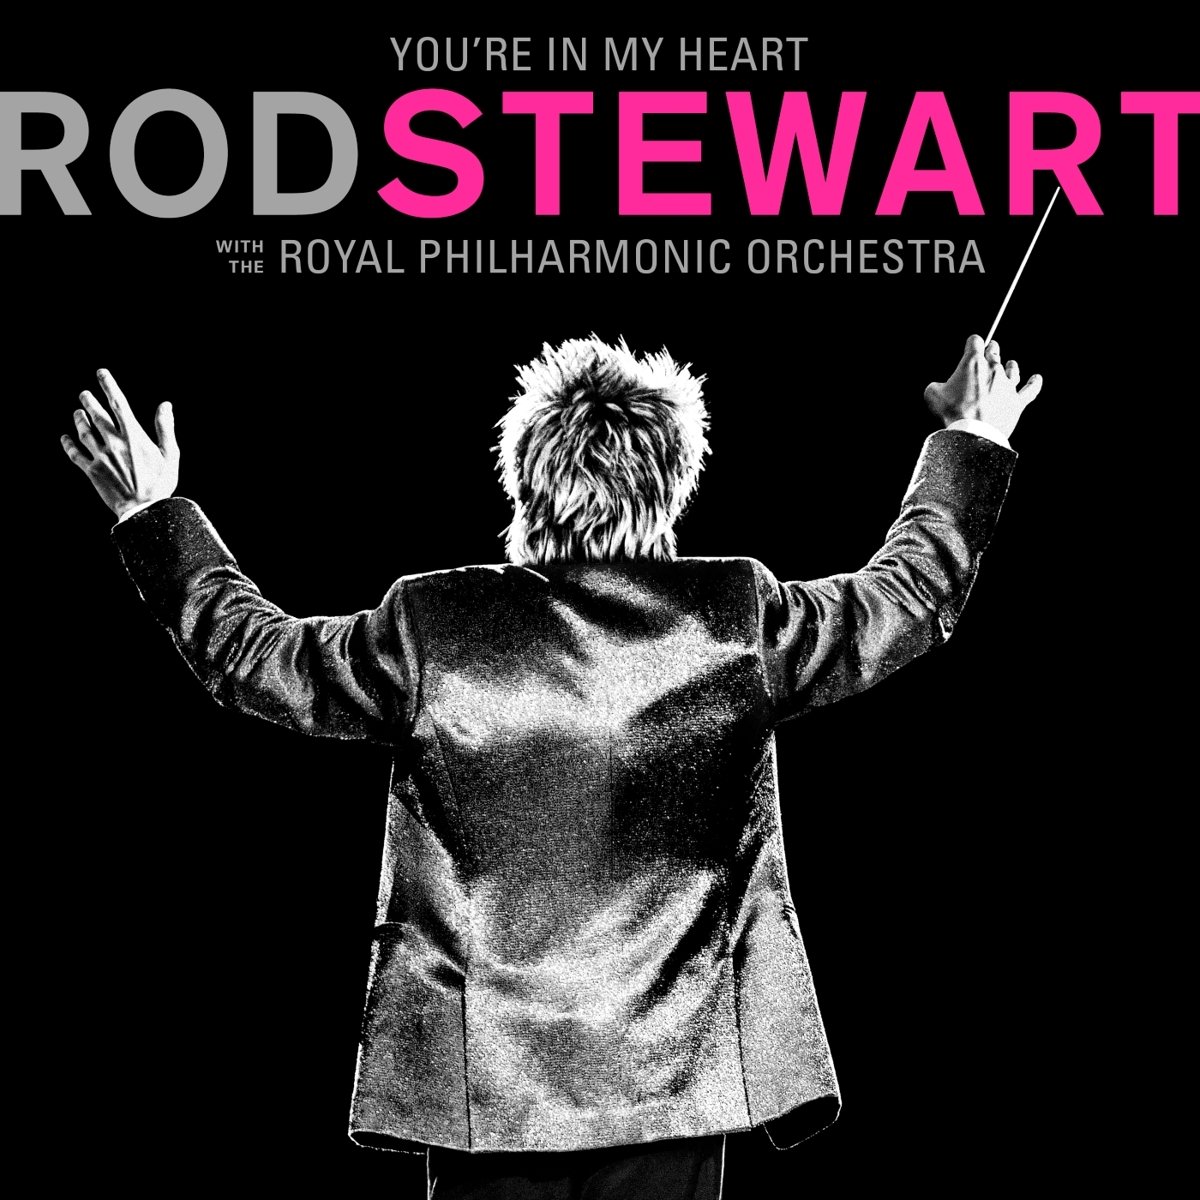 You're In My Heart (with The Royal Philharmonic Orchestra) (2CD) - Rod Stewart